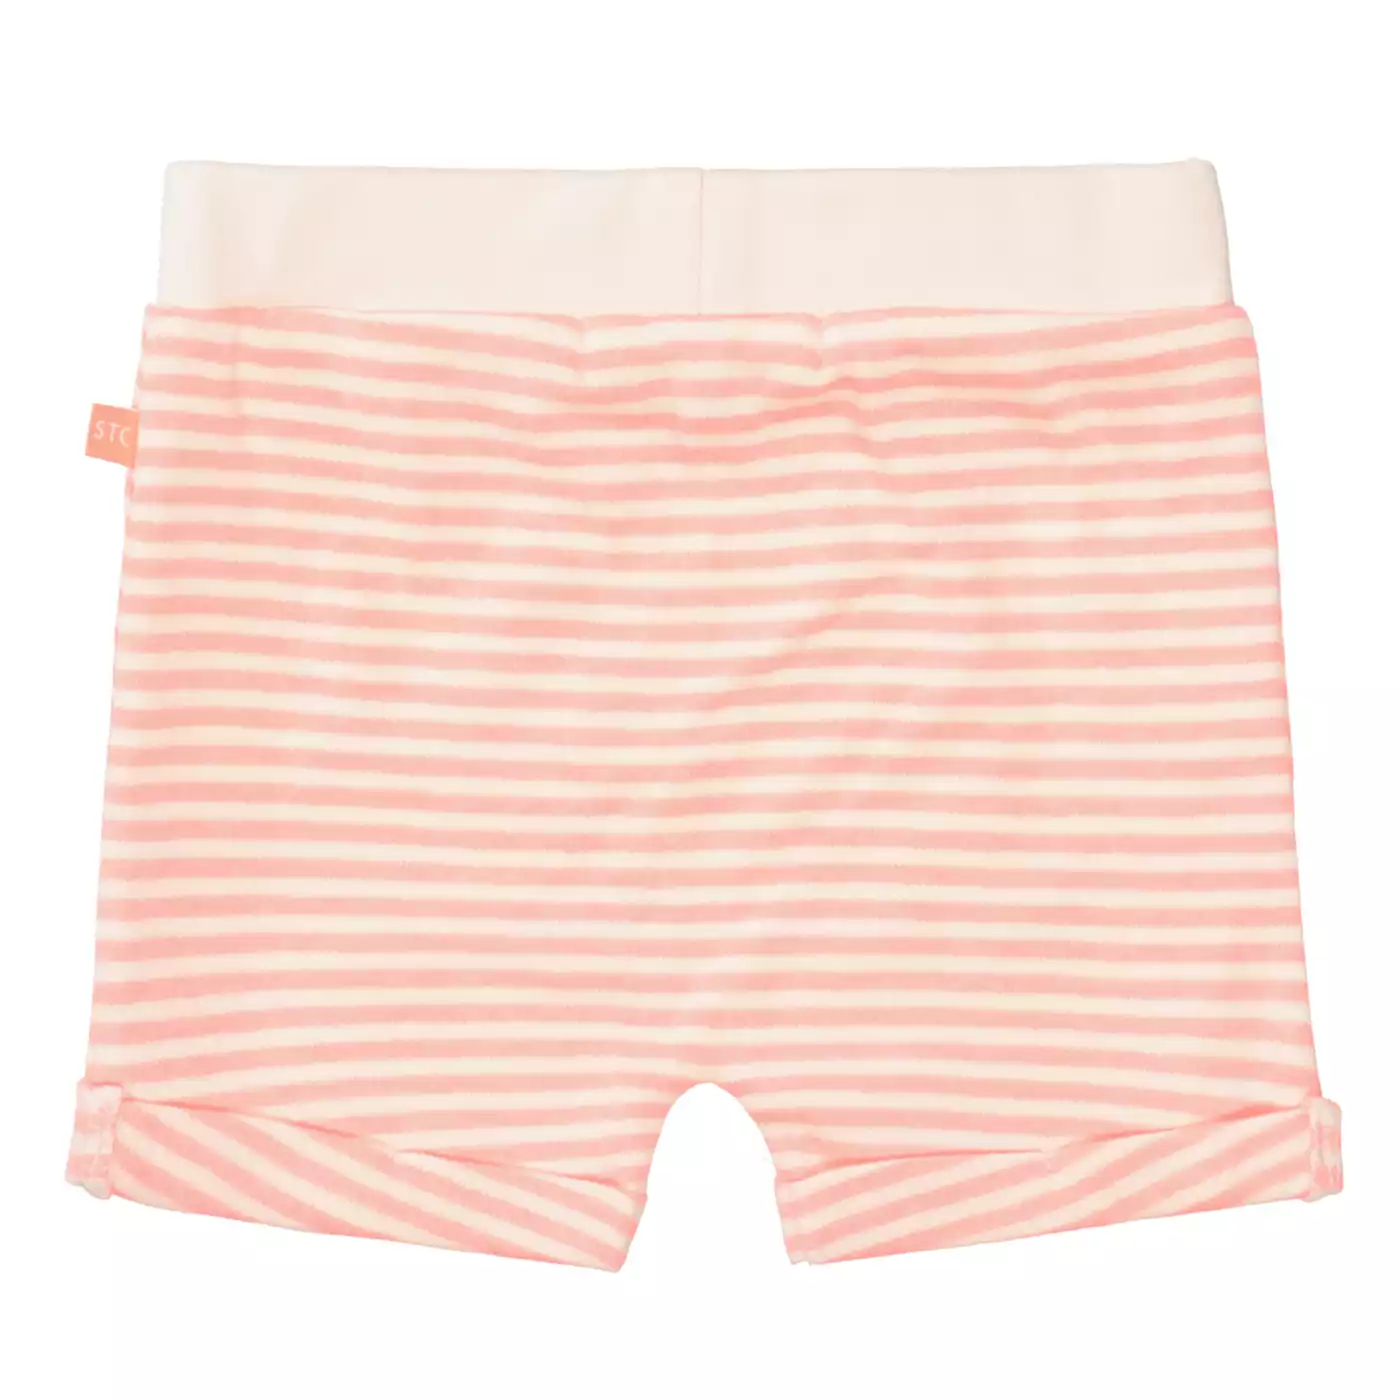 Shorts Neon Coral STACCATO Pink Rosa 2006580296107 4